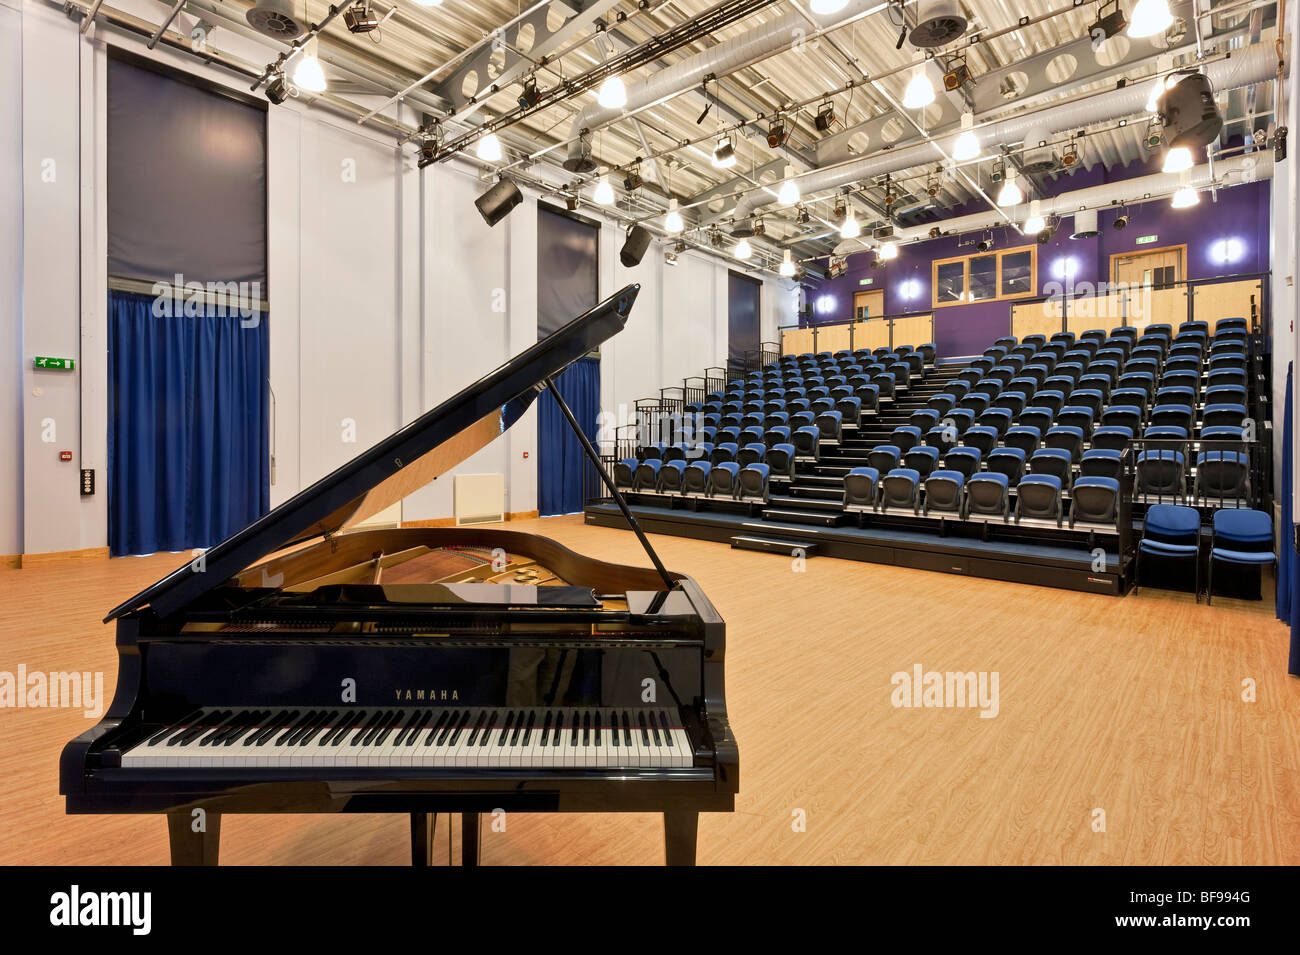 The Woodroffe Centre for performing arts at St Martins School, Northwood, Middlesex. Stock Photo